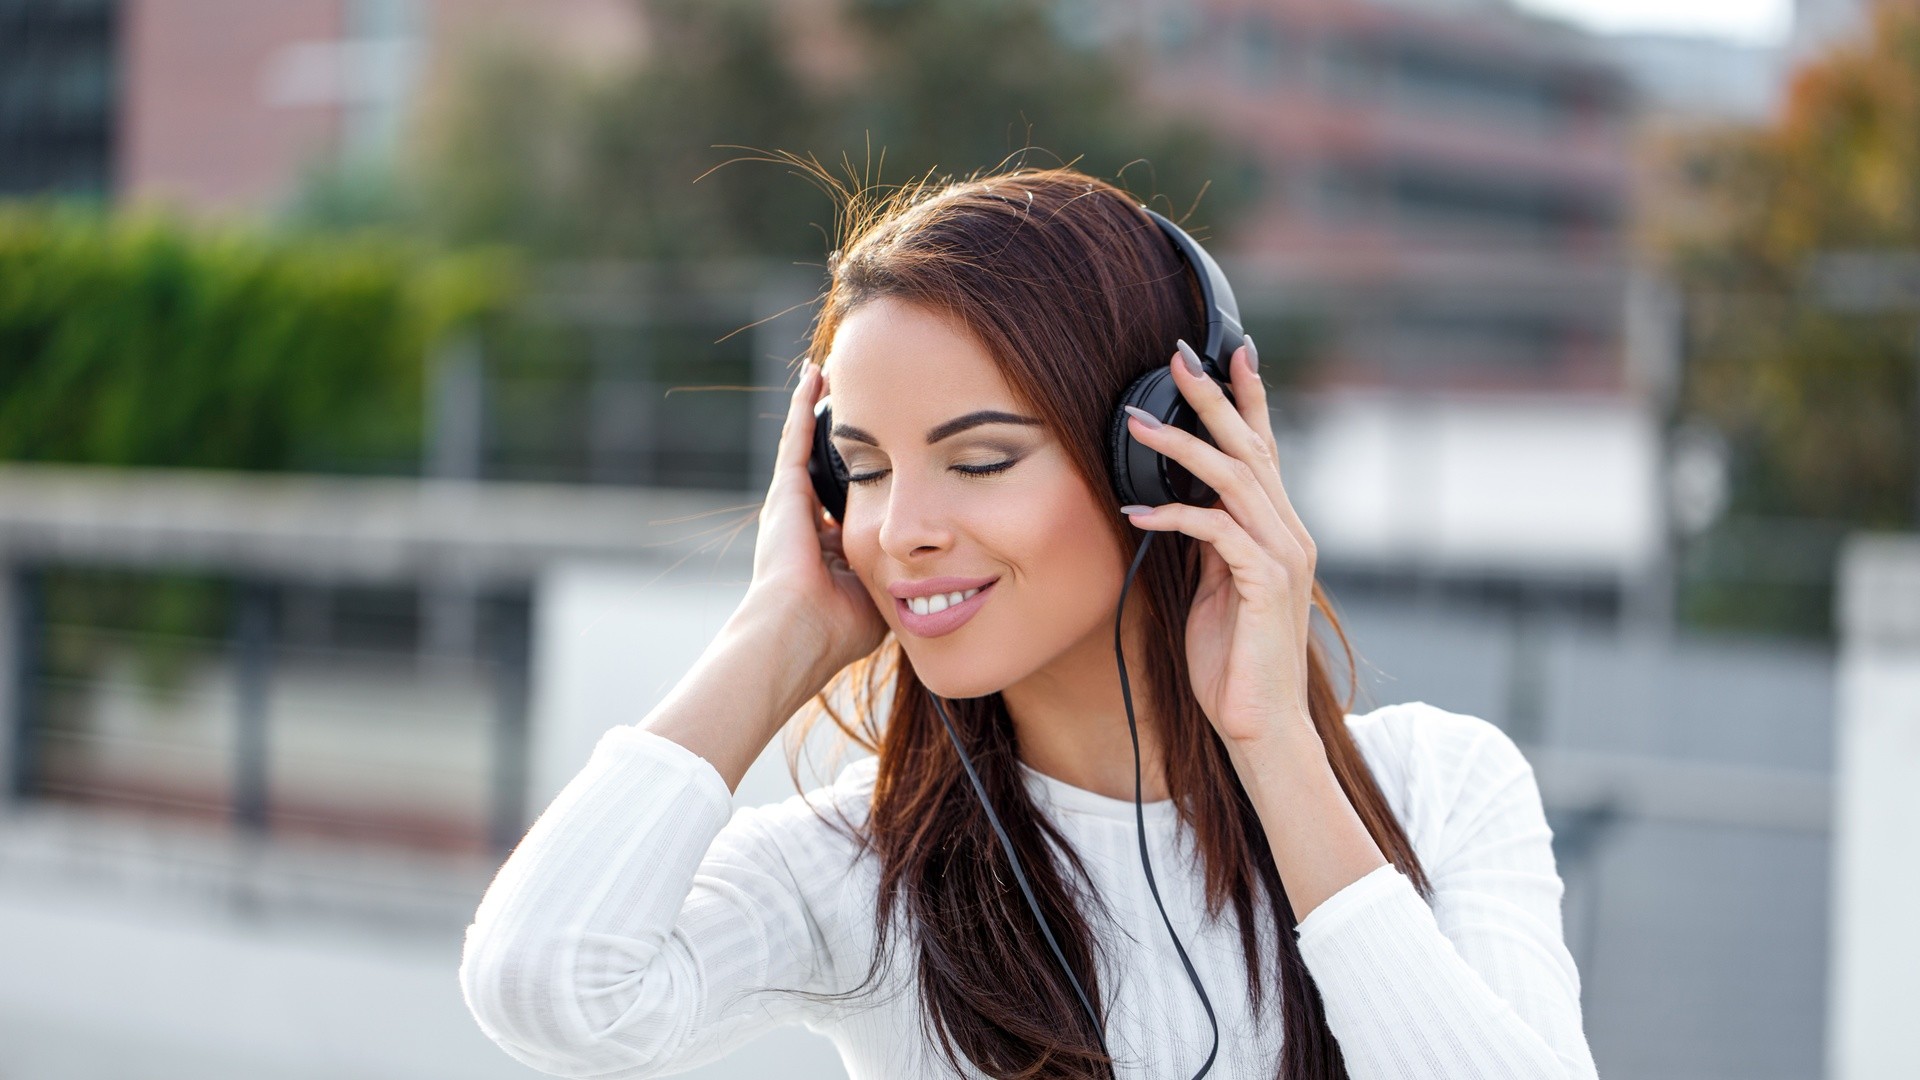 Beautiful Girl Listening To Music Using A Smart Phone And Smiling While